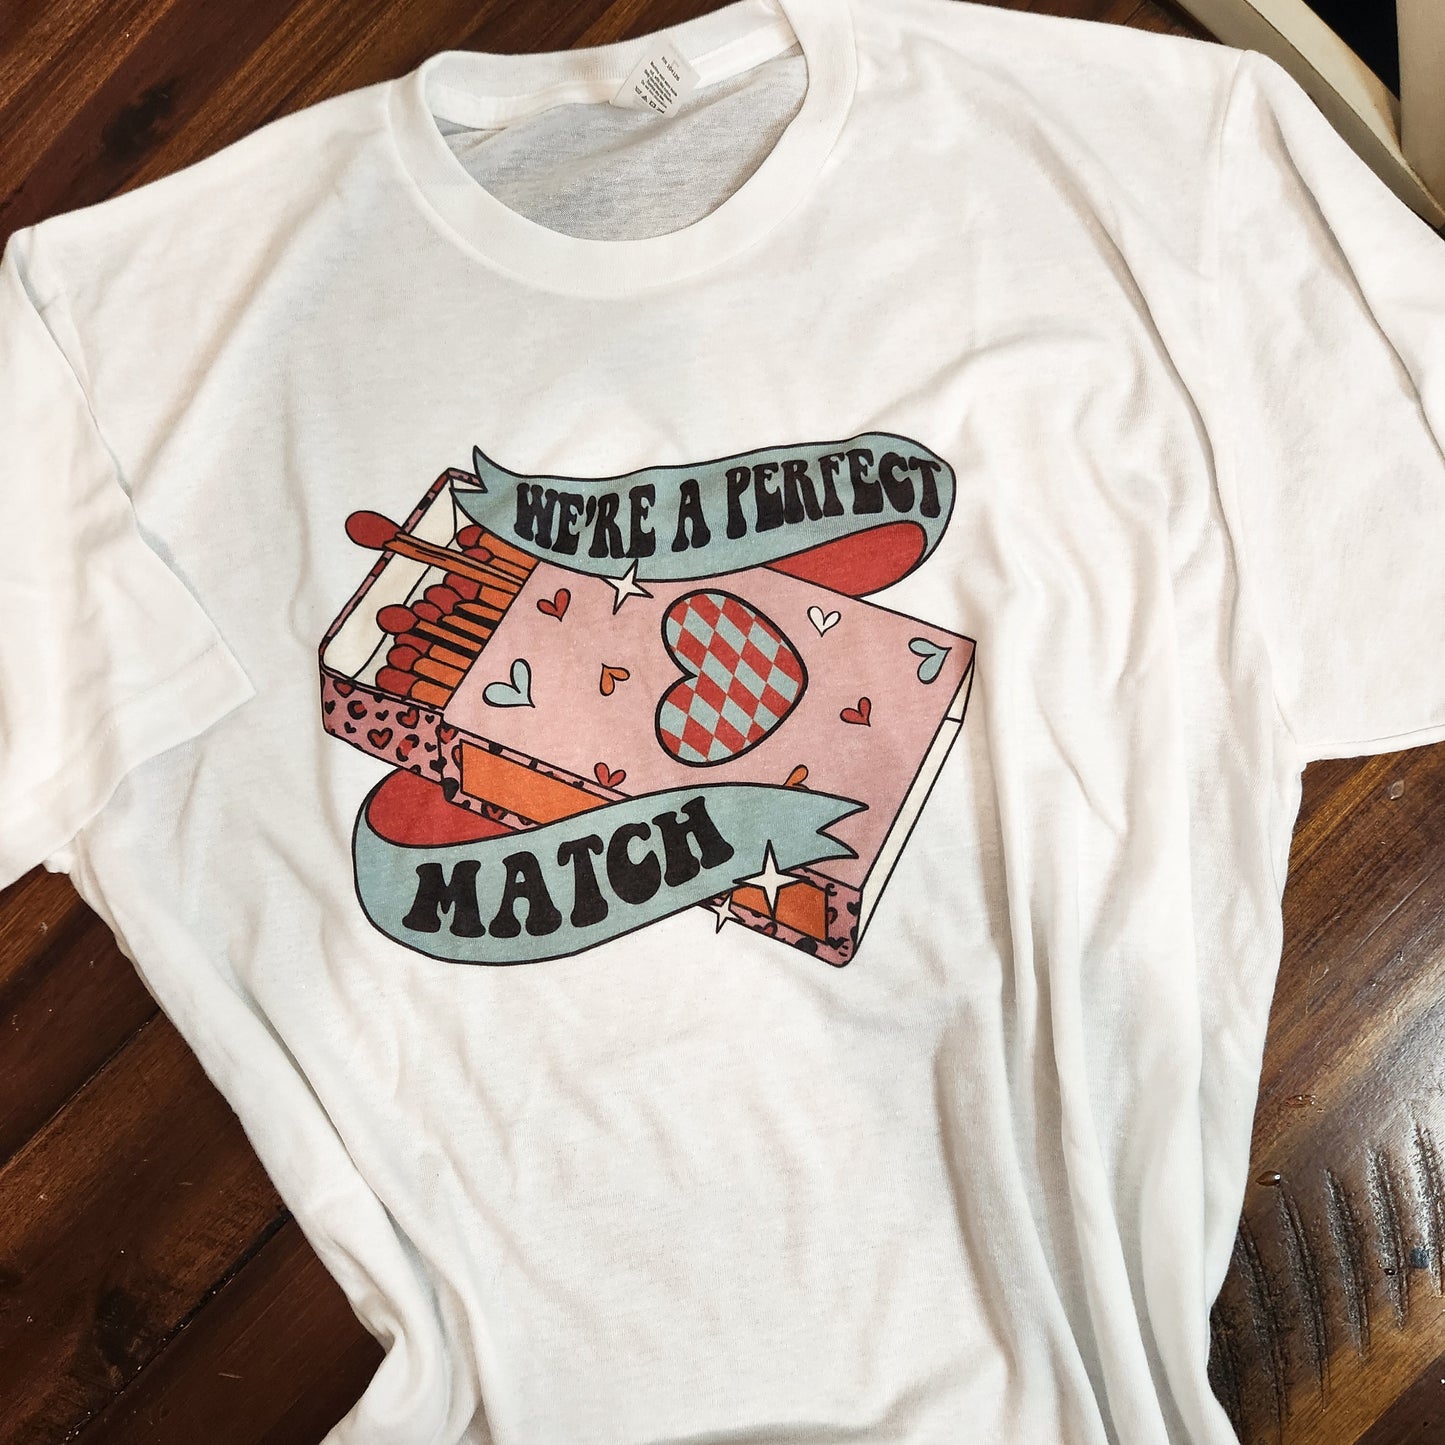 We're A Perfect Match Tee